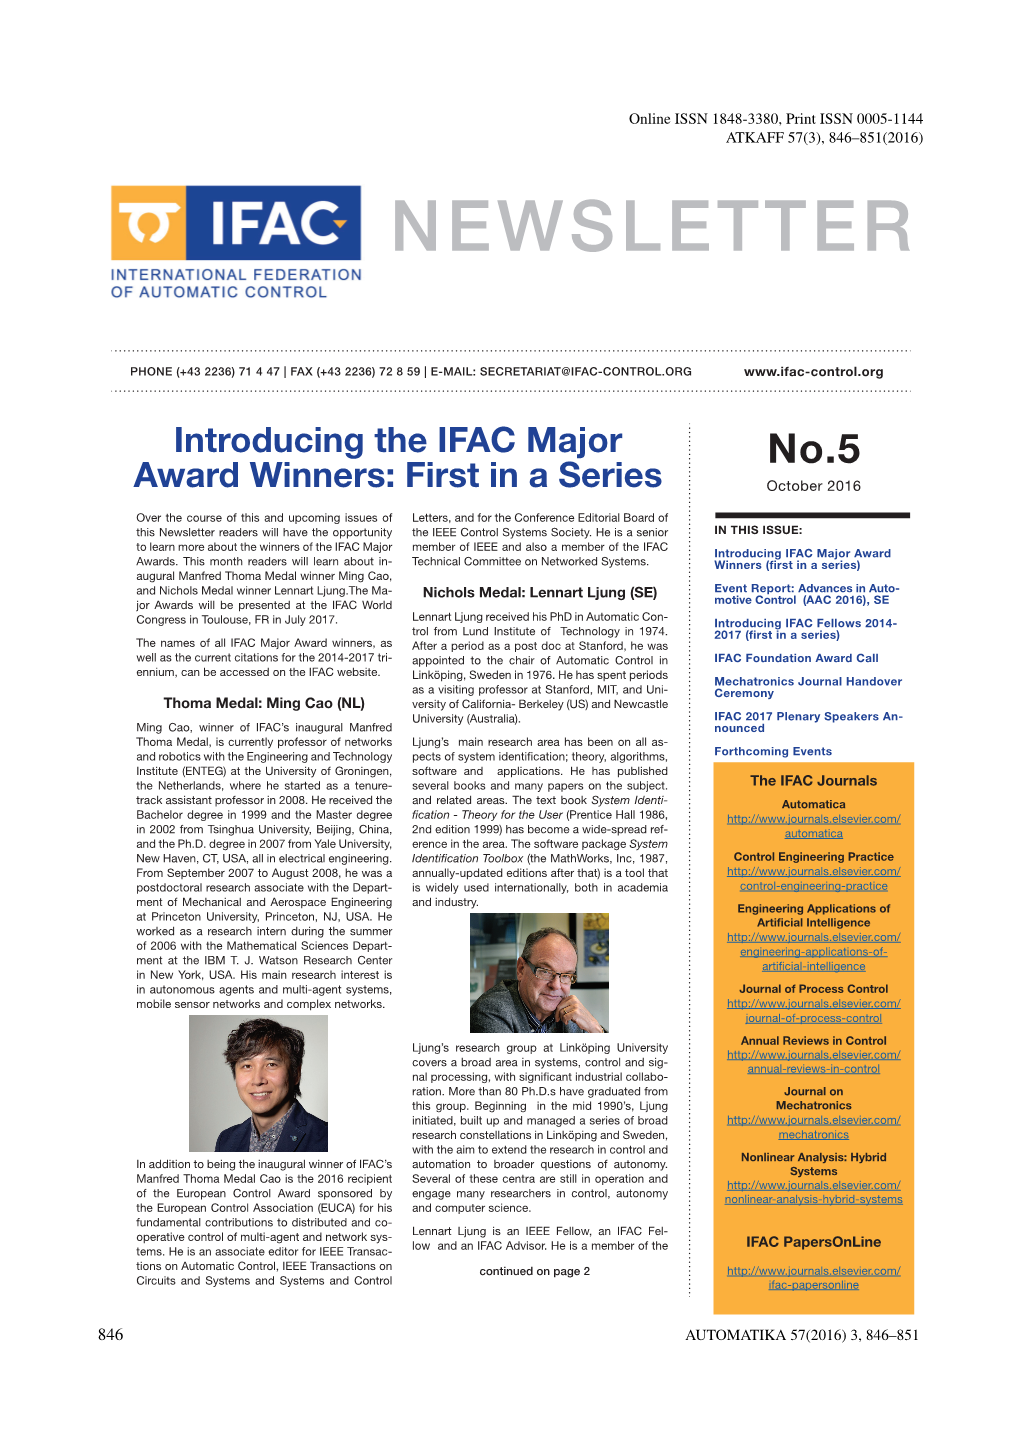 Introducing the IFAC Major Award Winners: First in a Series